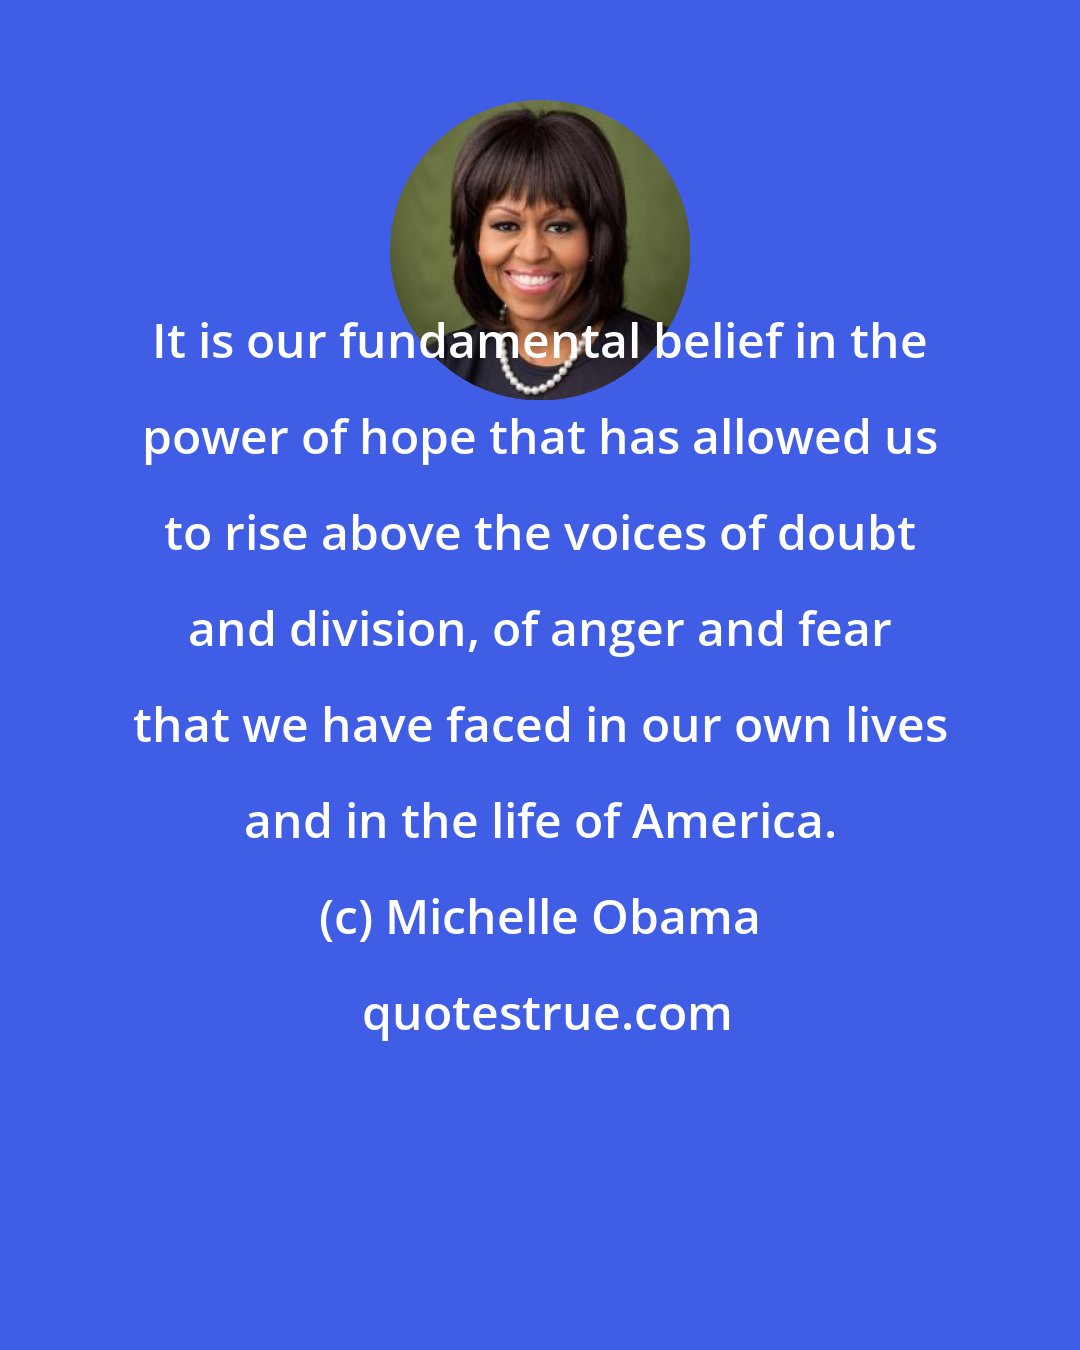 Michelle Obama: It is our fundamental belief in the power of hope that has allowed us to rise above the voices of doubt and division, of anger and fear that we have faced in our own lives and in the life of America.